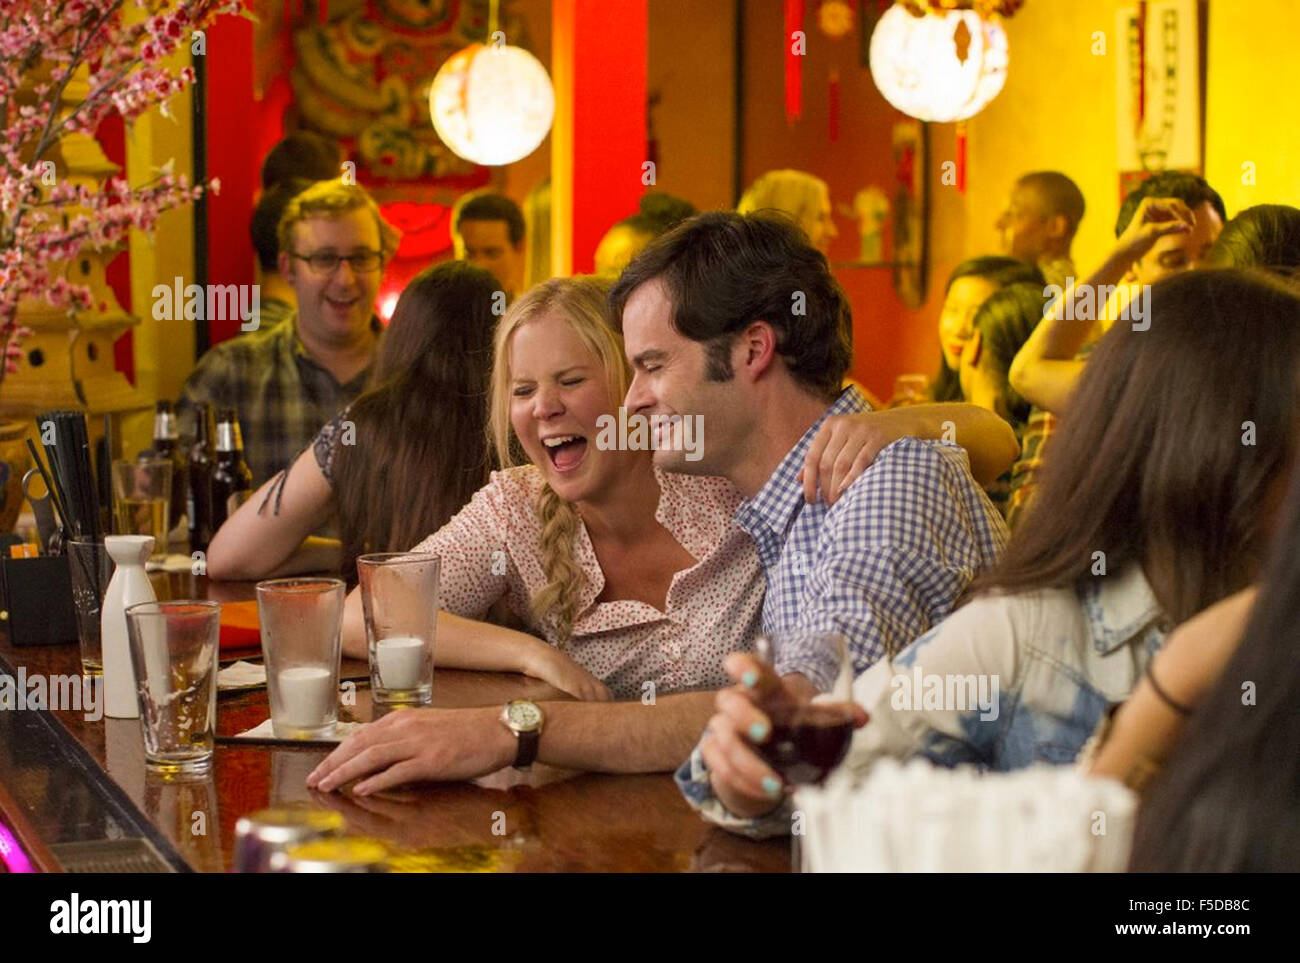 TRAINWRECK 2015 Universal Pictures film with Amy Schumer and Bill Hader Stock Photo